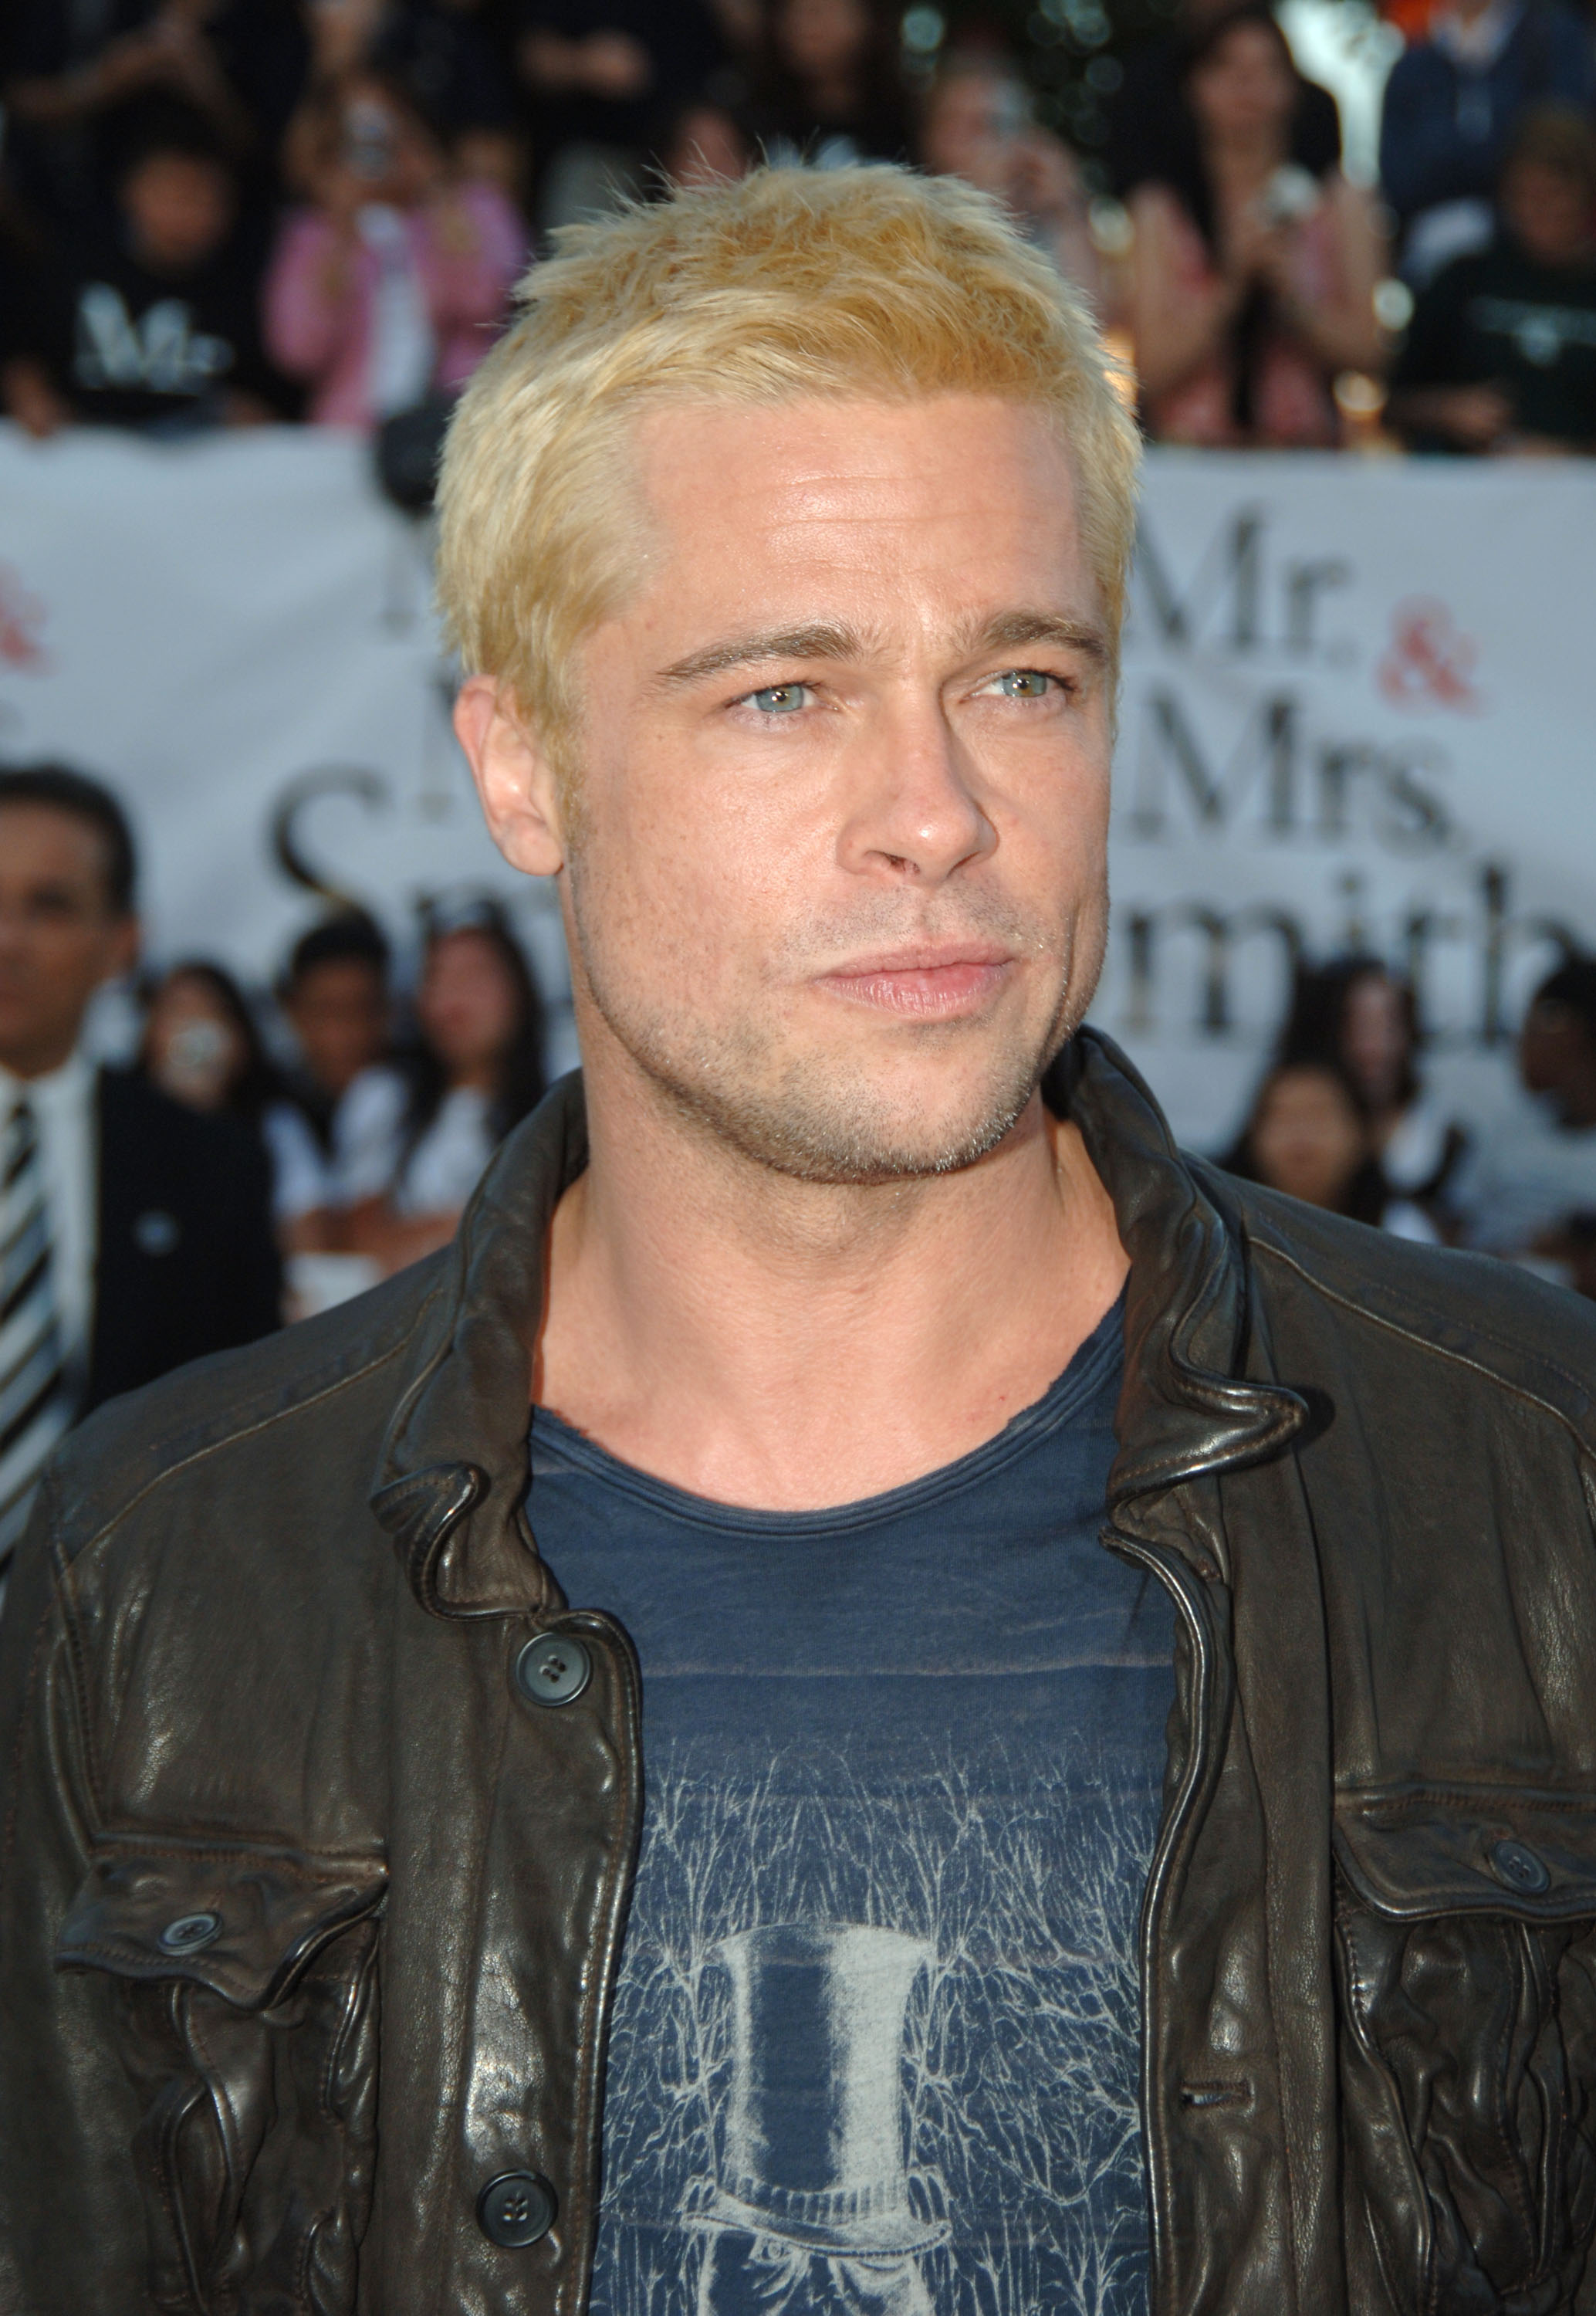 Brad Pitt during "Mr. & Mrs. Smith" Los Angeles premiere at Mann's Westwood in Westwood, California on June 7, 2005. | Source: Getty Images